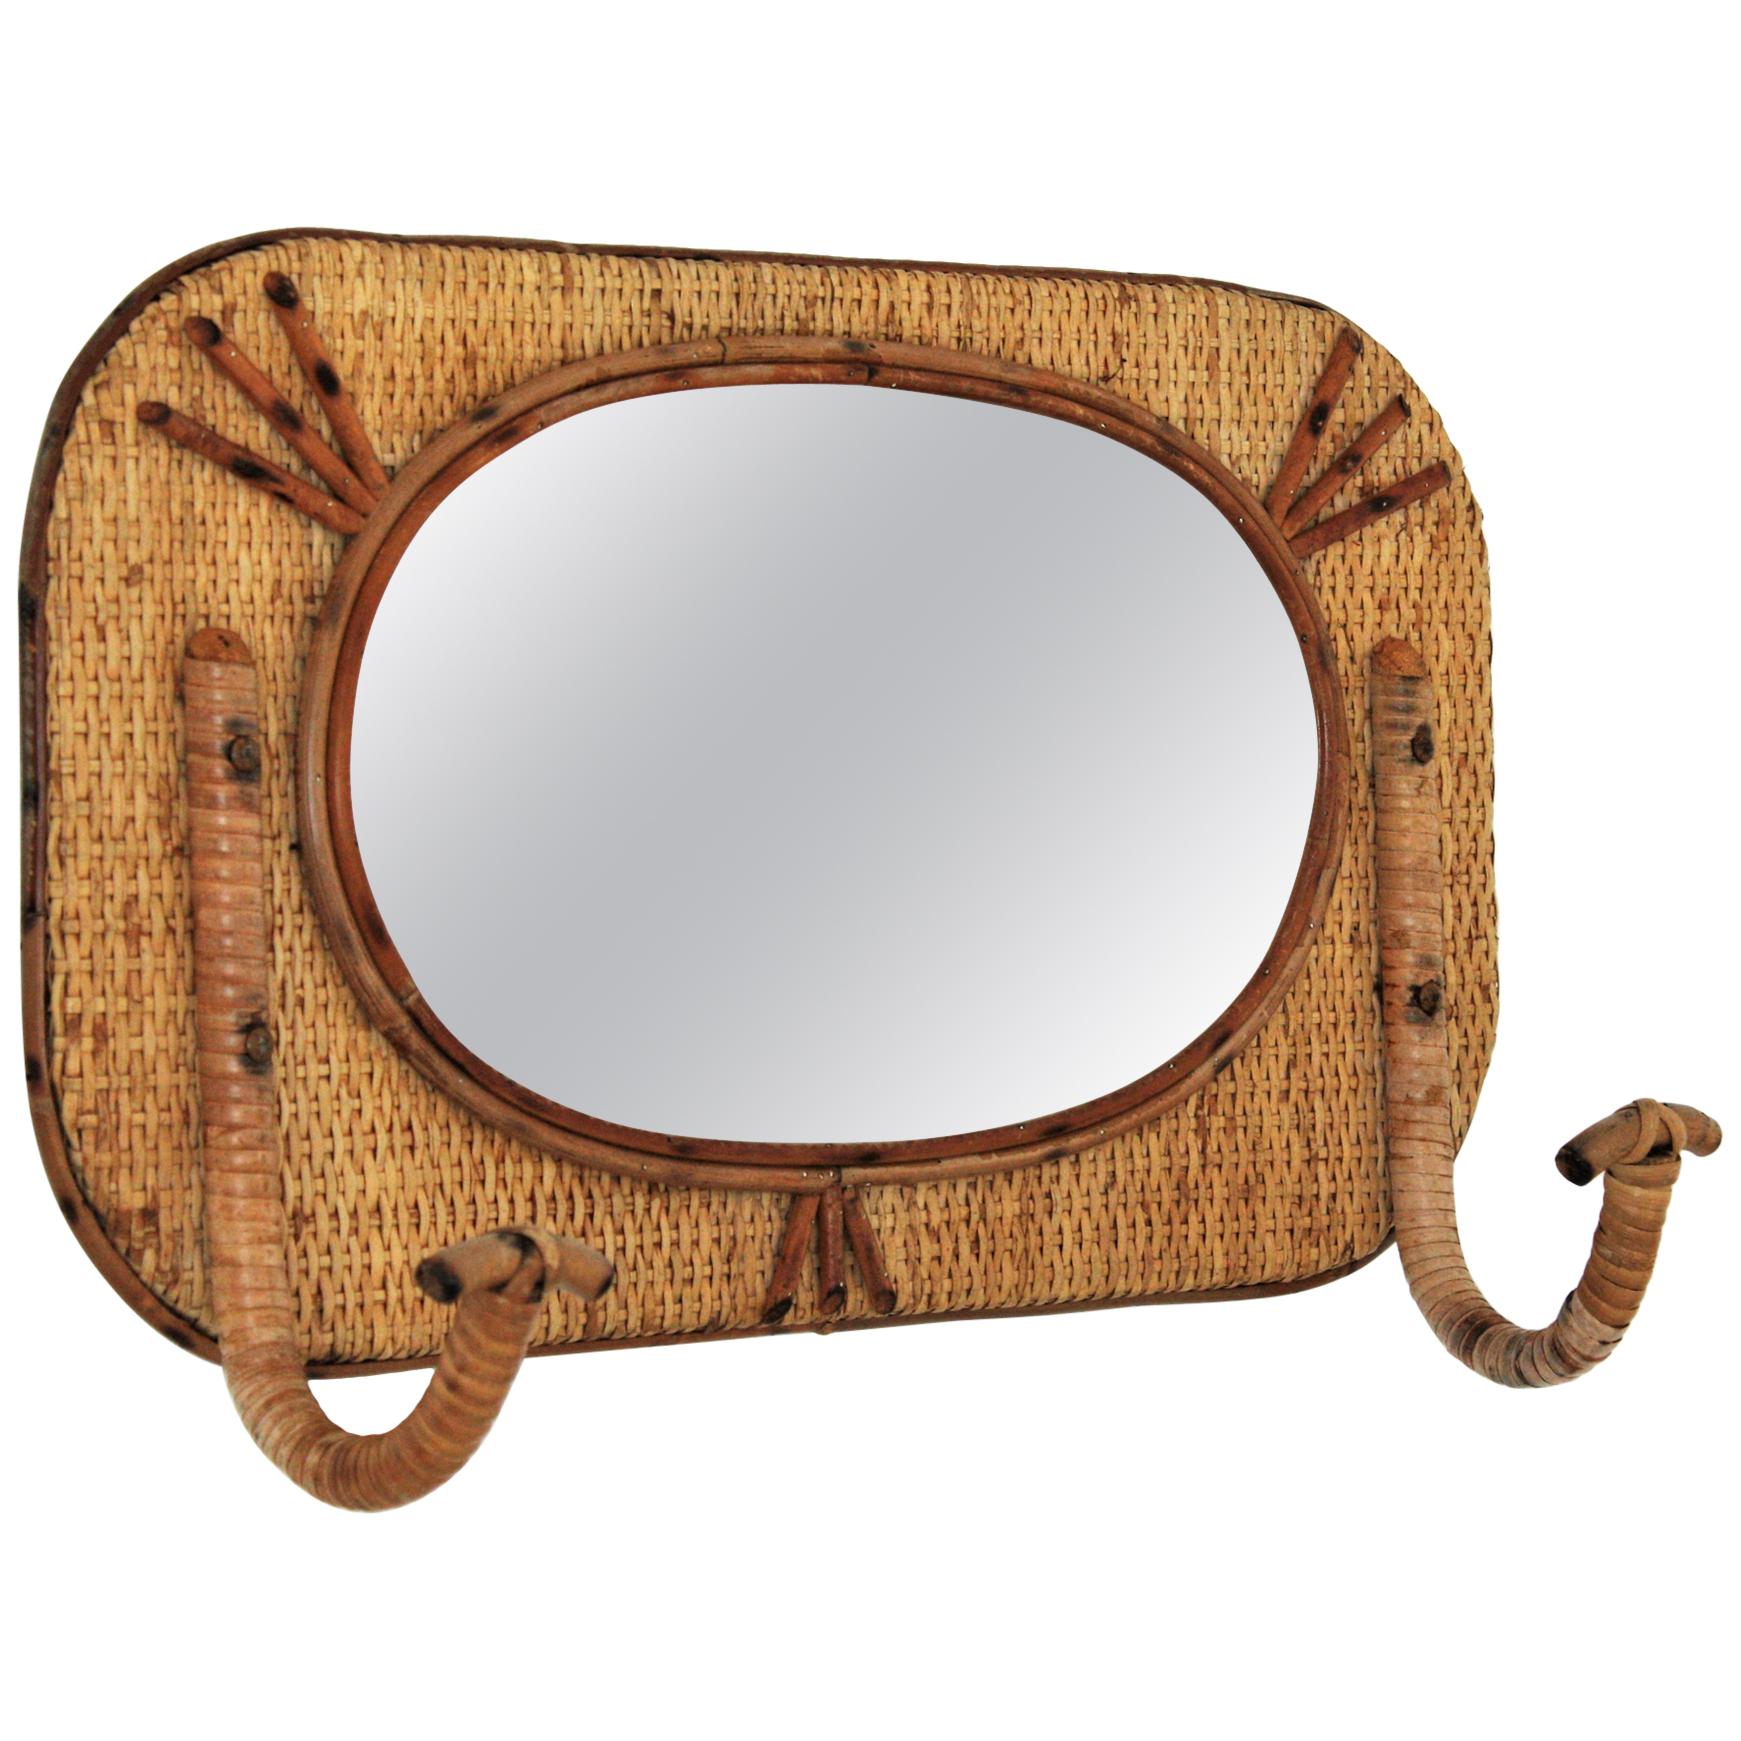 Bamboo and Rattan Wall Coat Hanger Rack with Mirror, Spain, 1960s